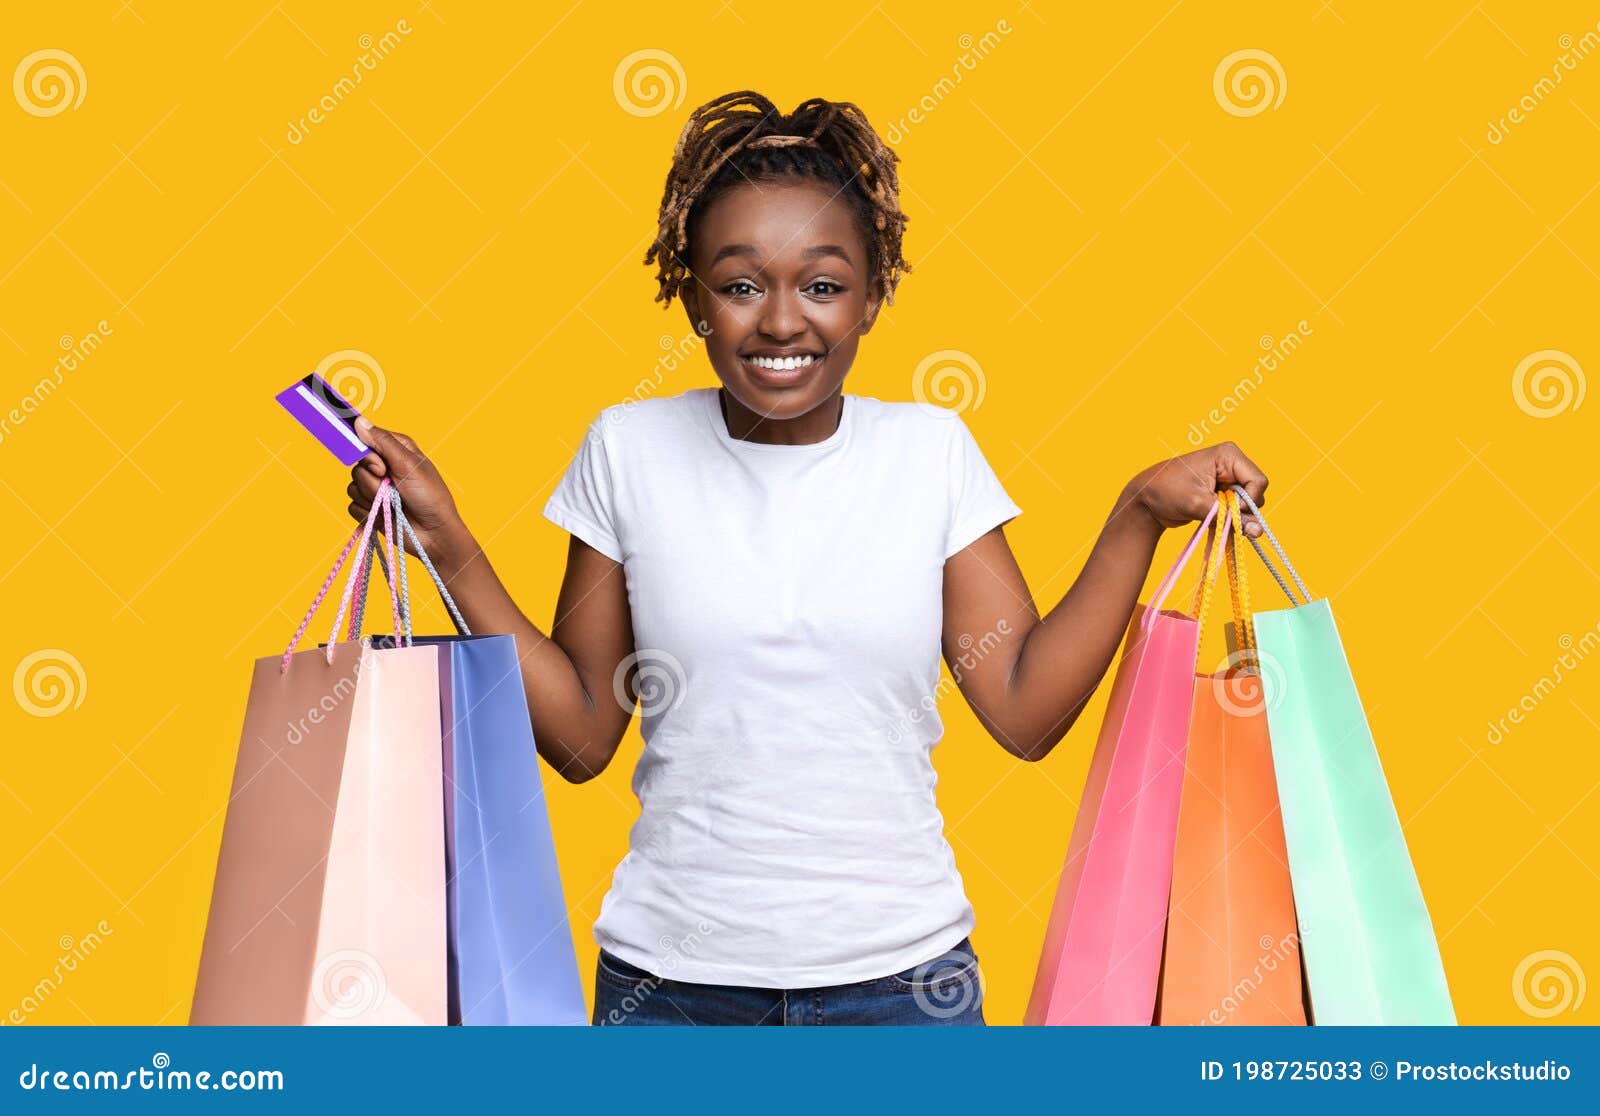 Happy Black Lady with Shopping Bags and Credit Card Stock Image - Image ...